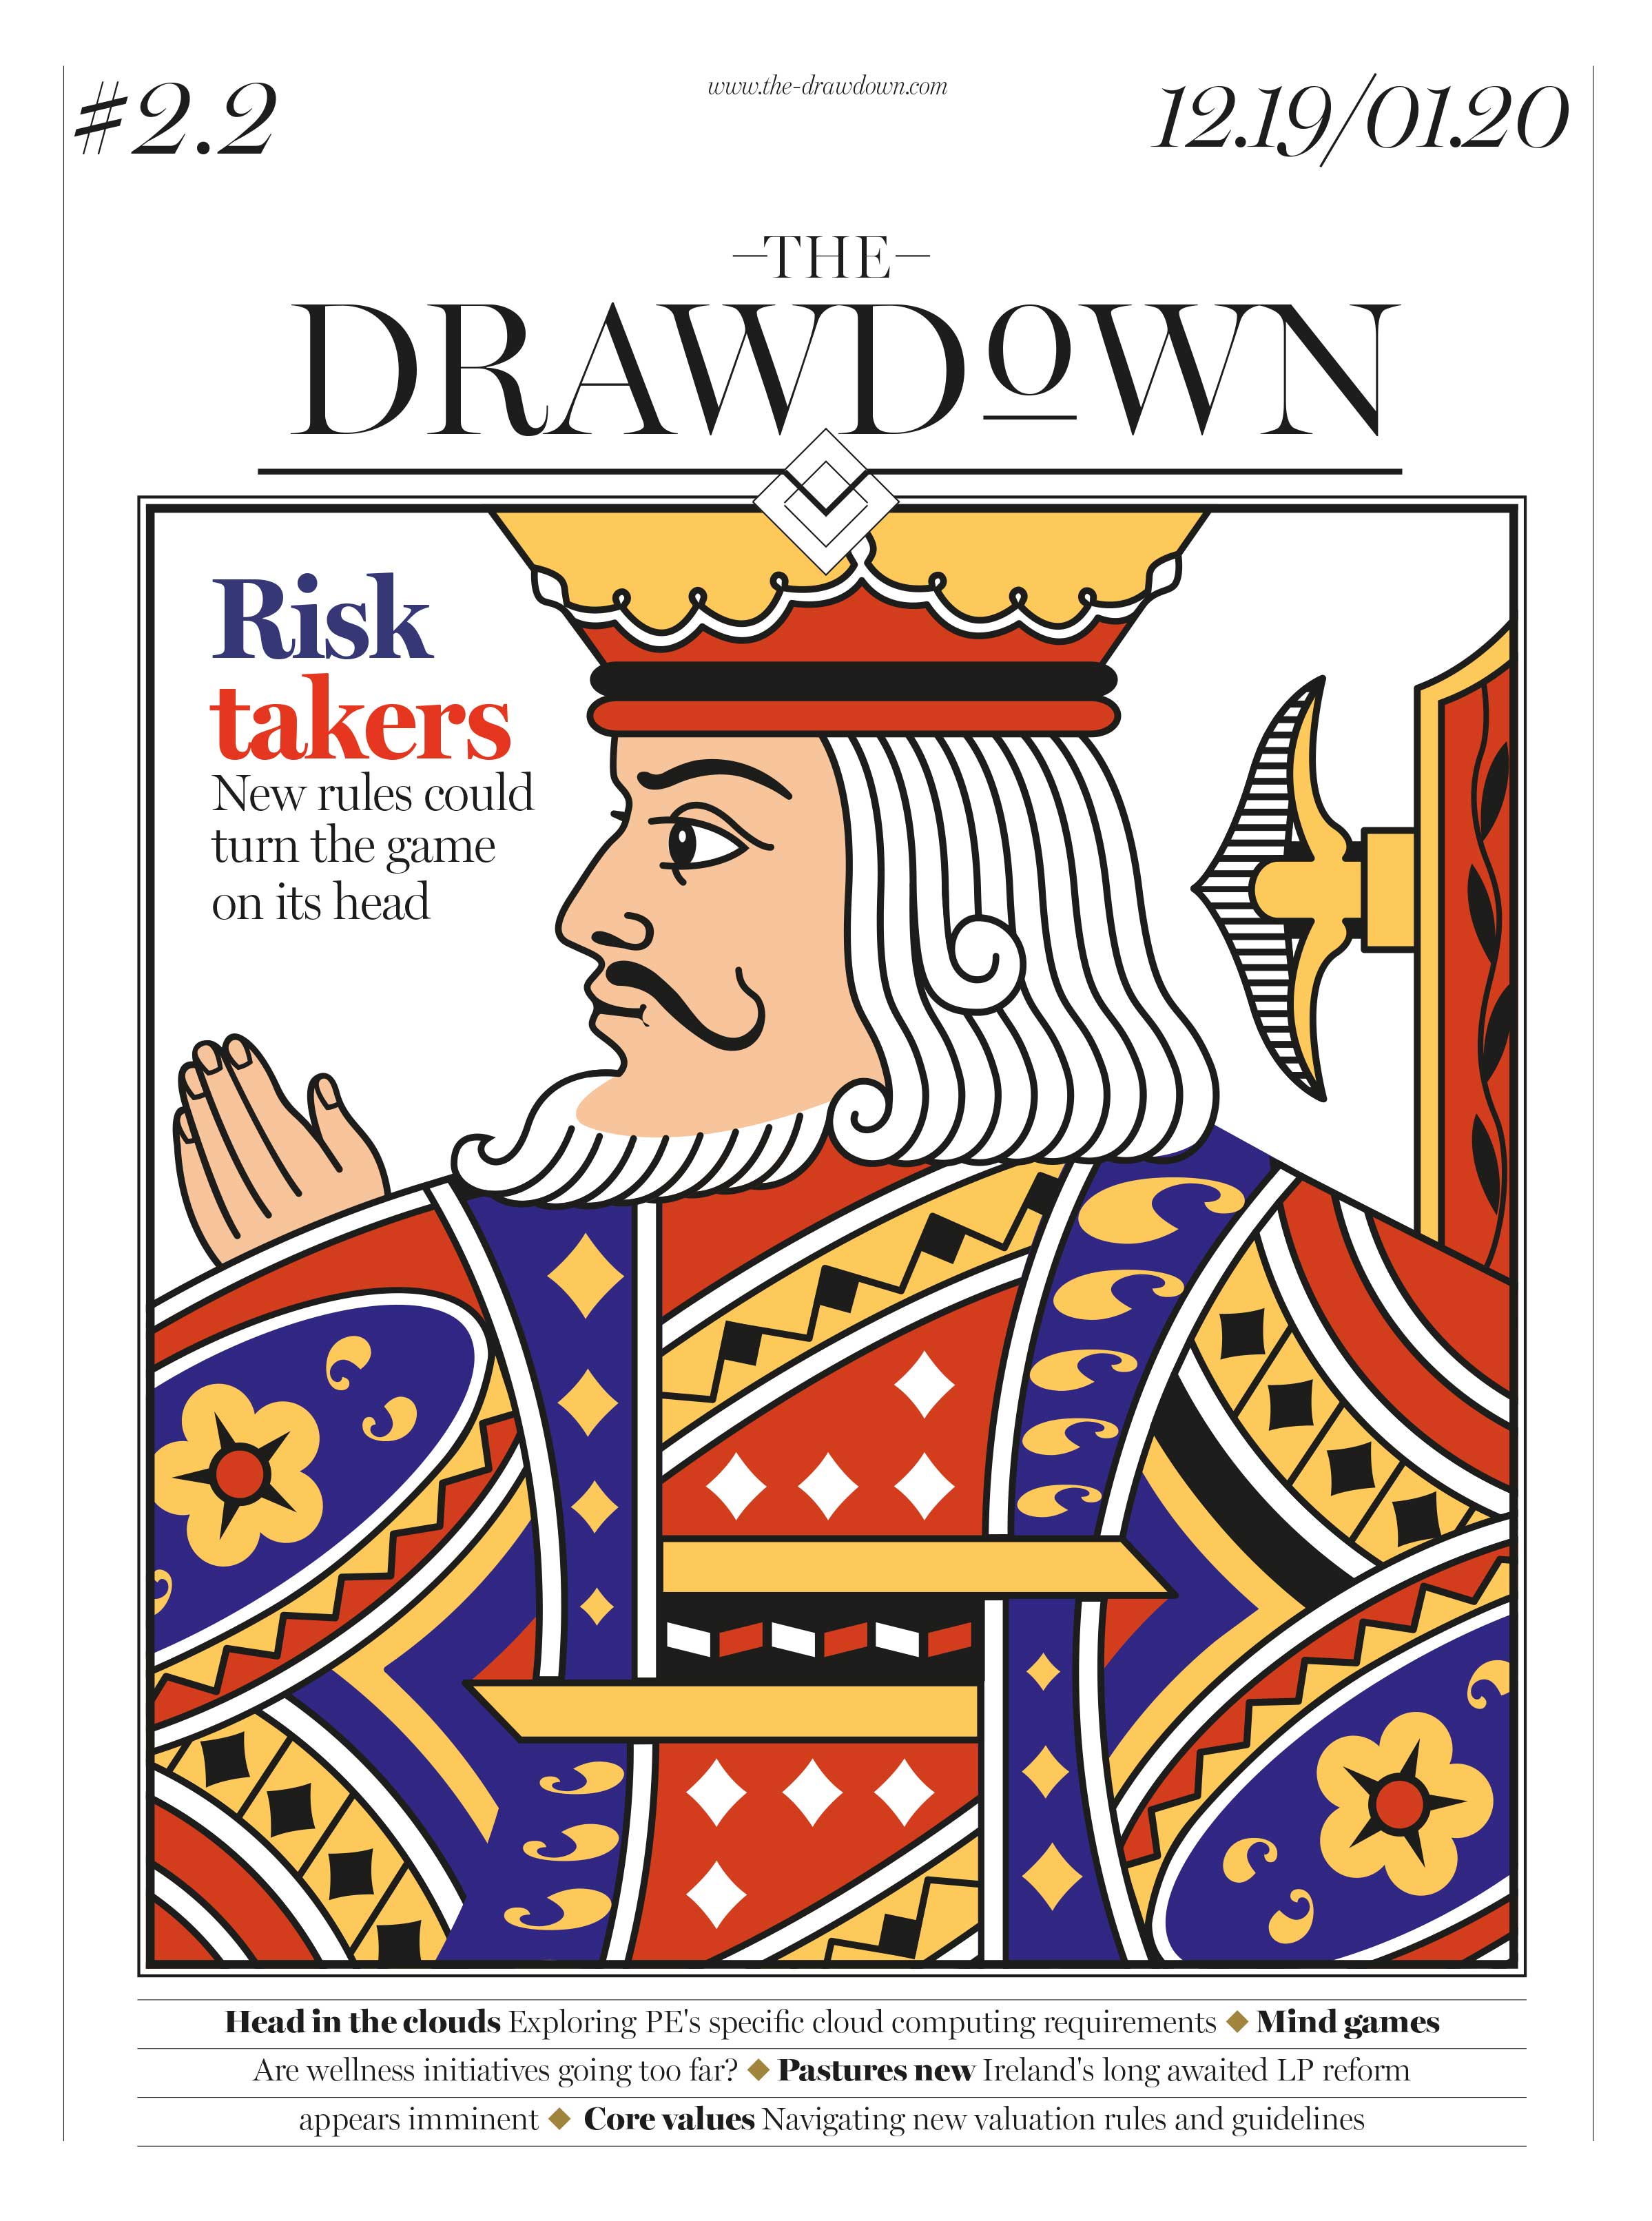 The Drawdown Issue December 2019 / January 2020 Cover